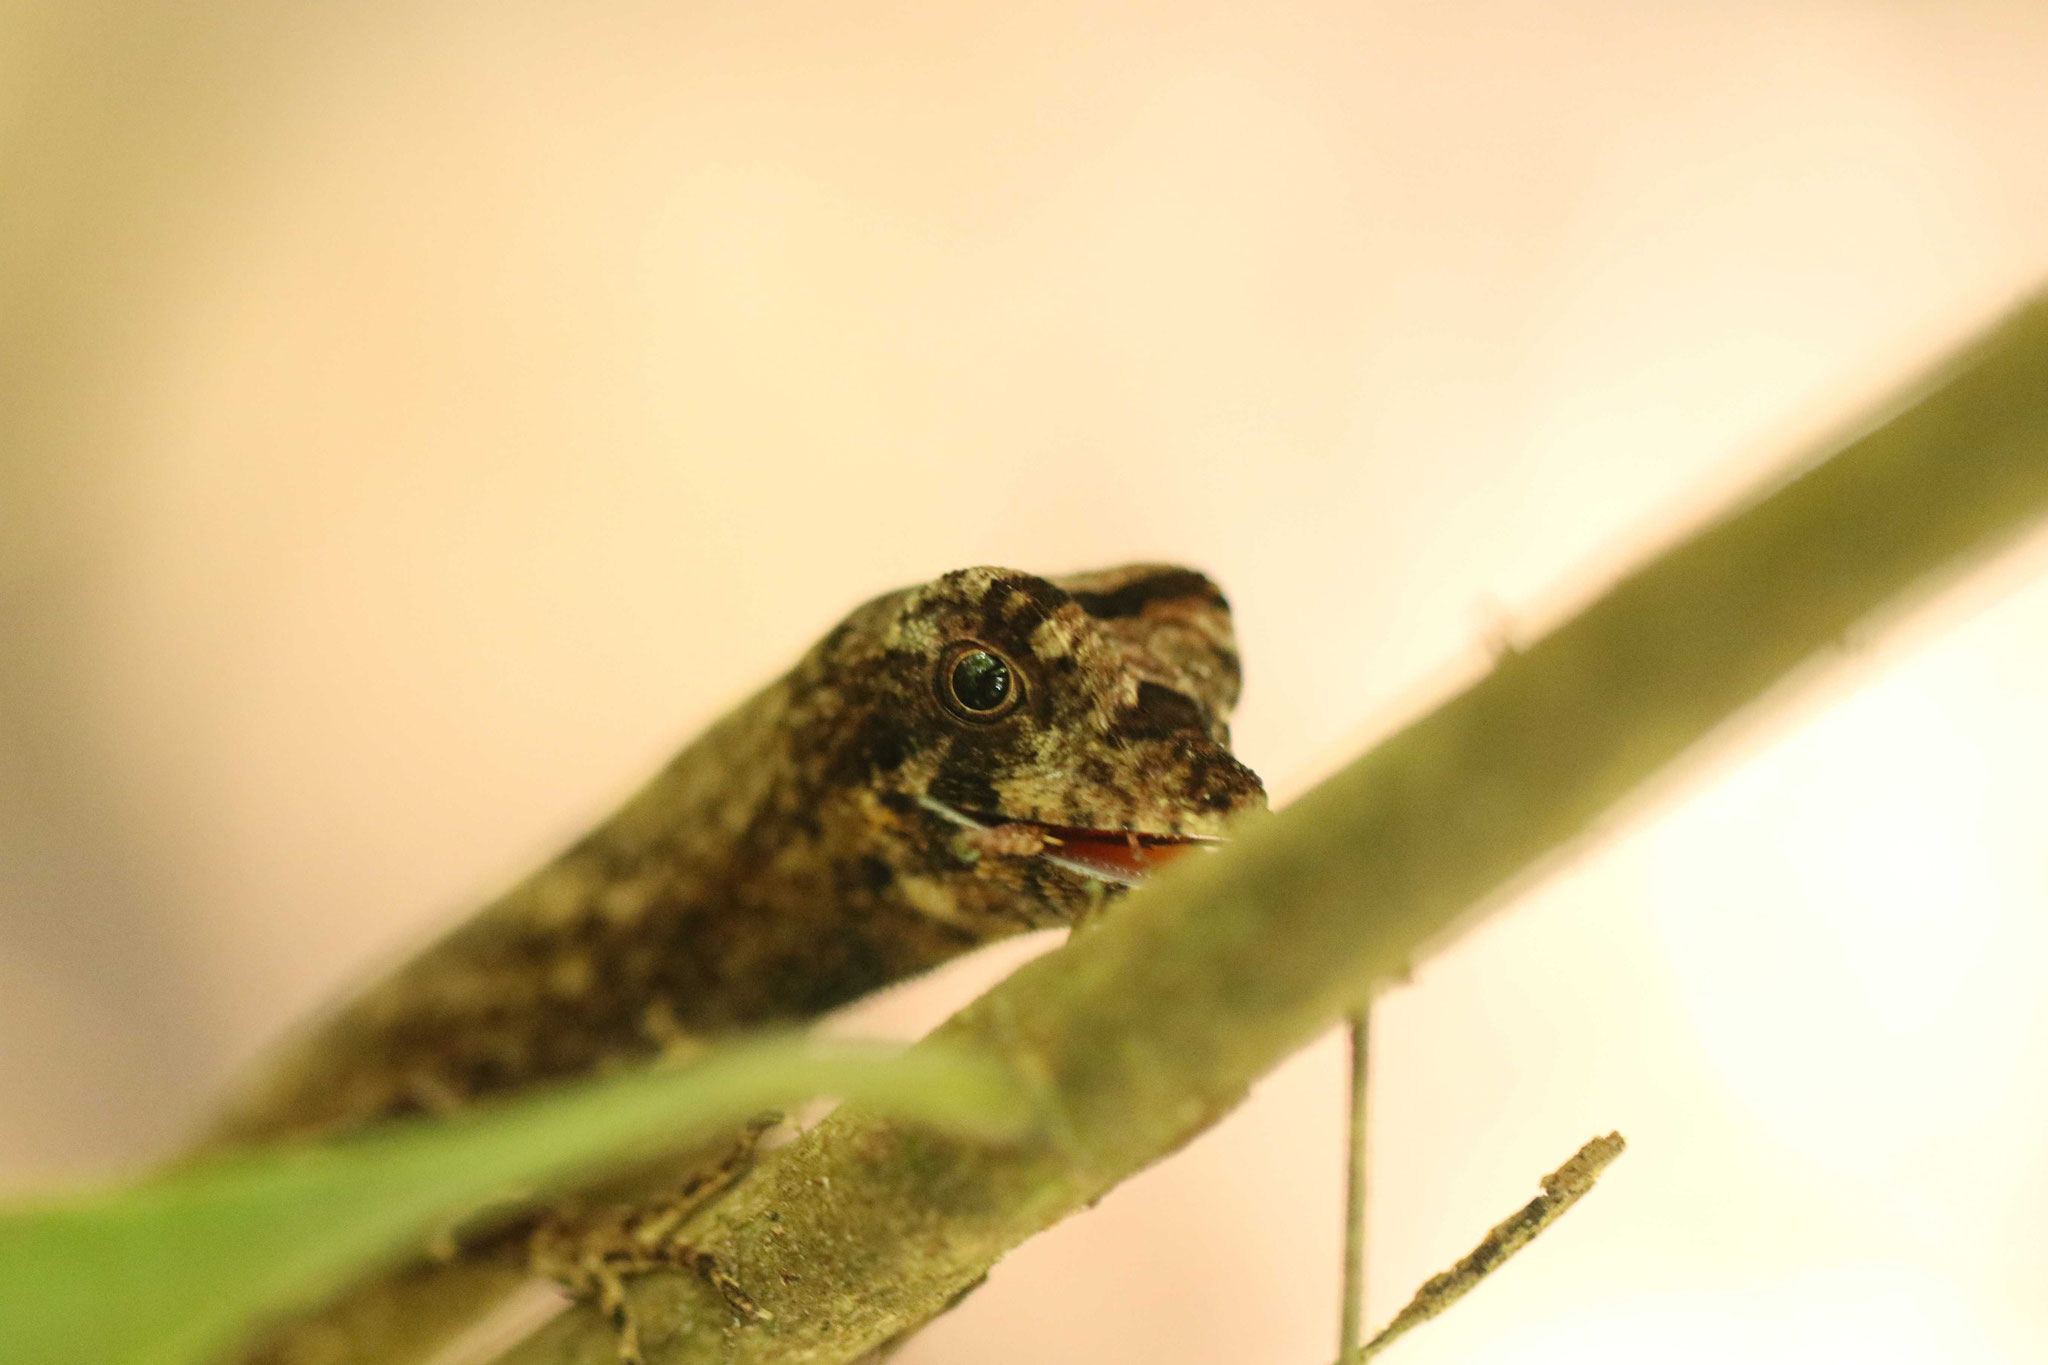 Anolis chrysolepis